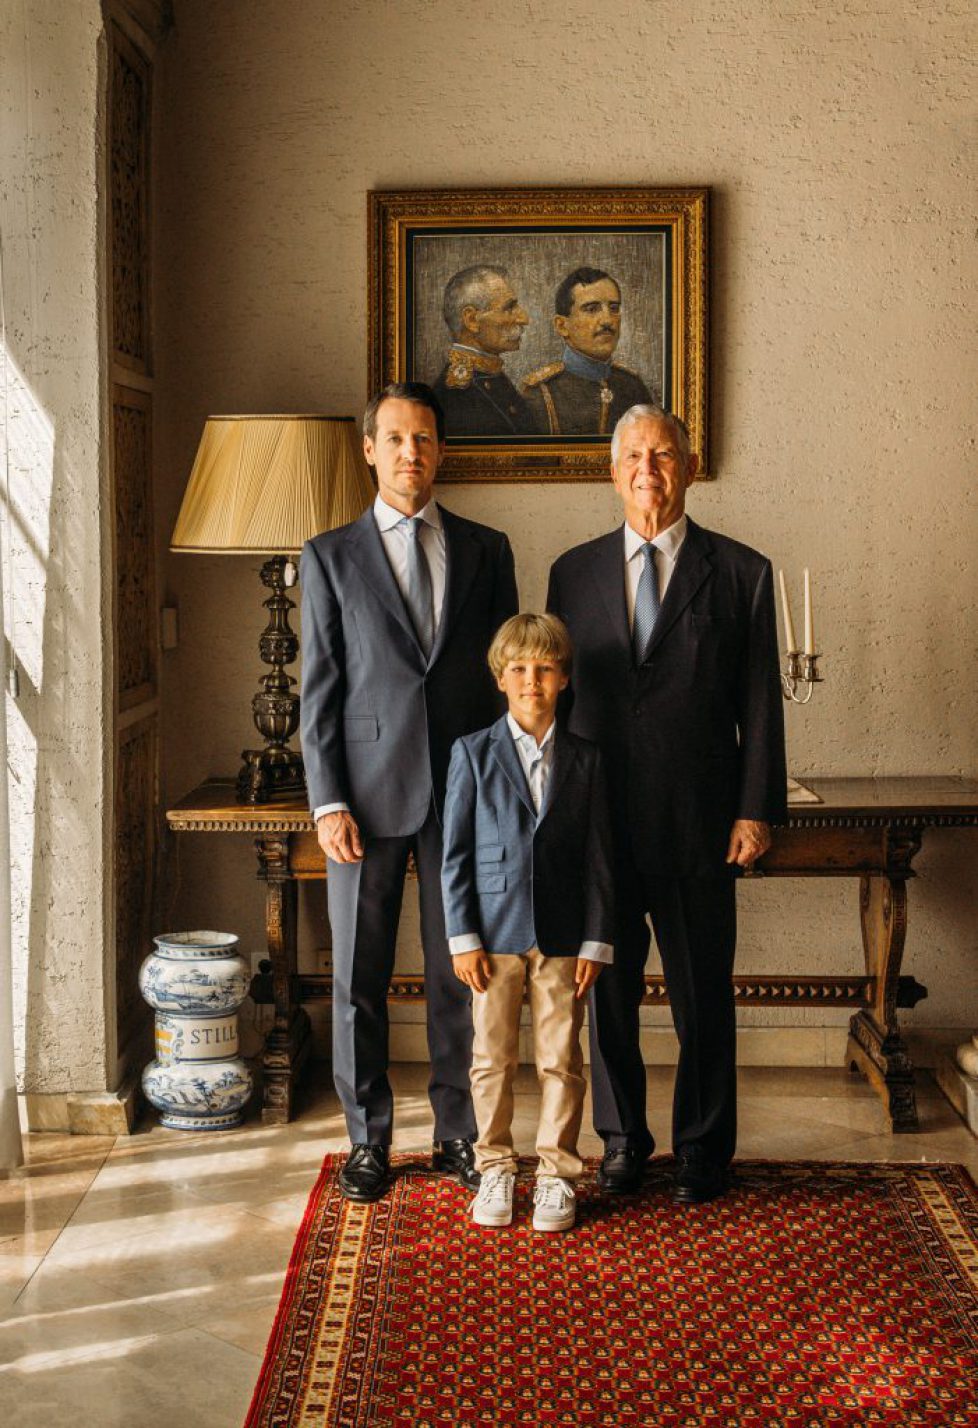 Succession portrait of the Royal family of Serbia